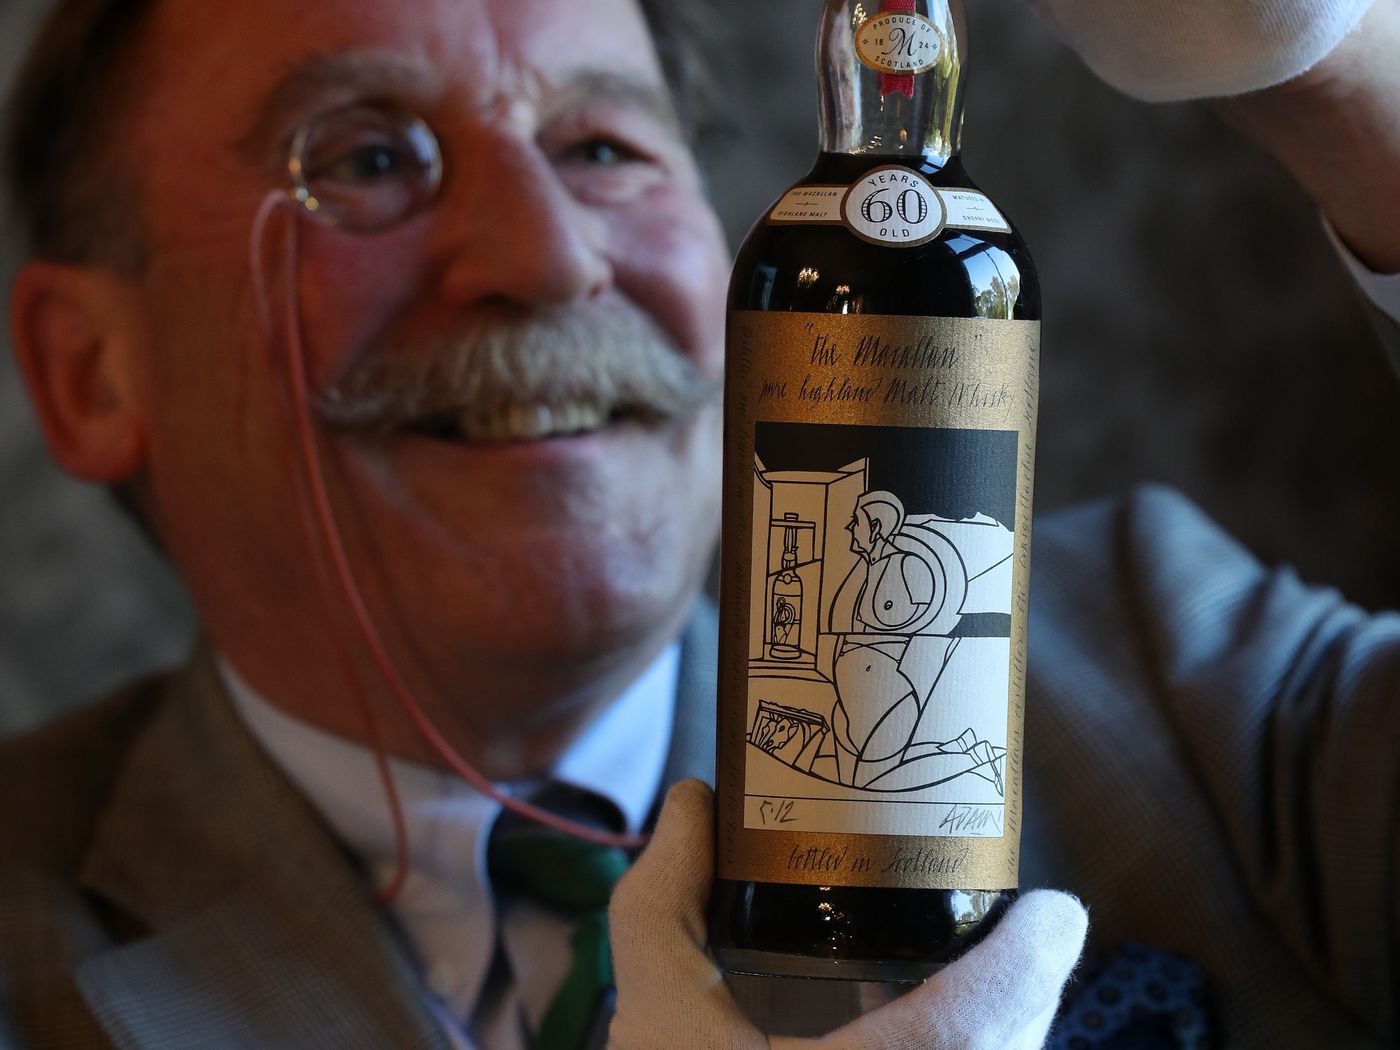 Macallan 1926 being examined before auction